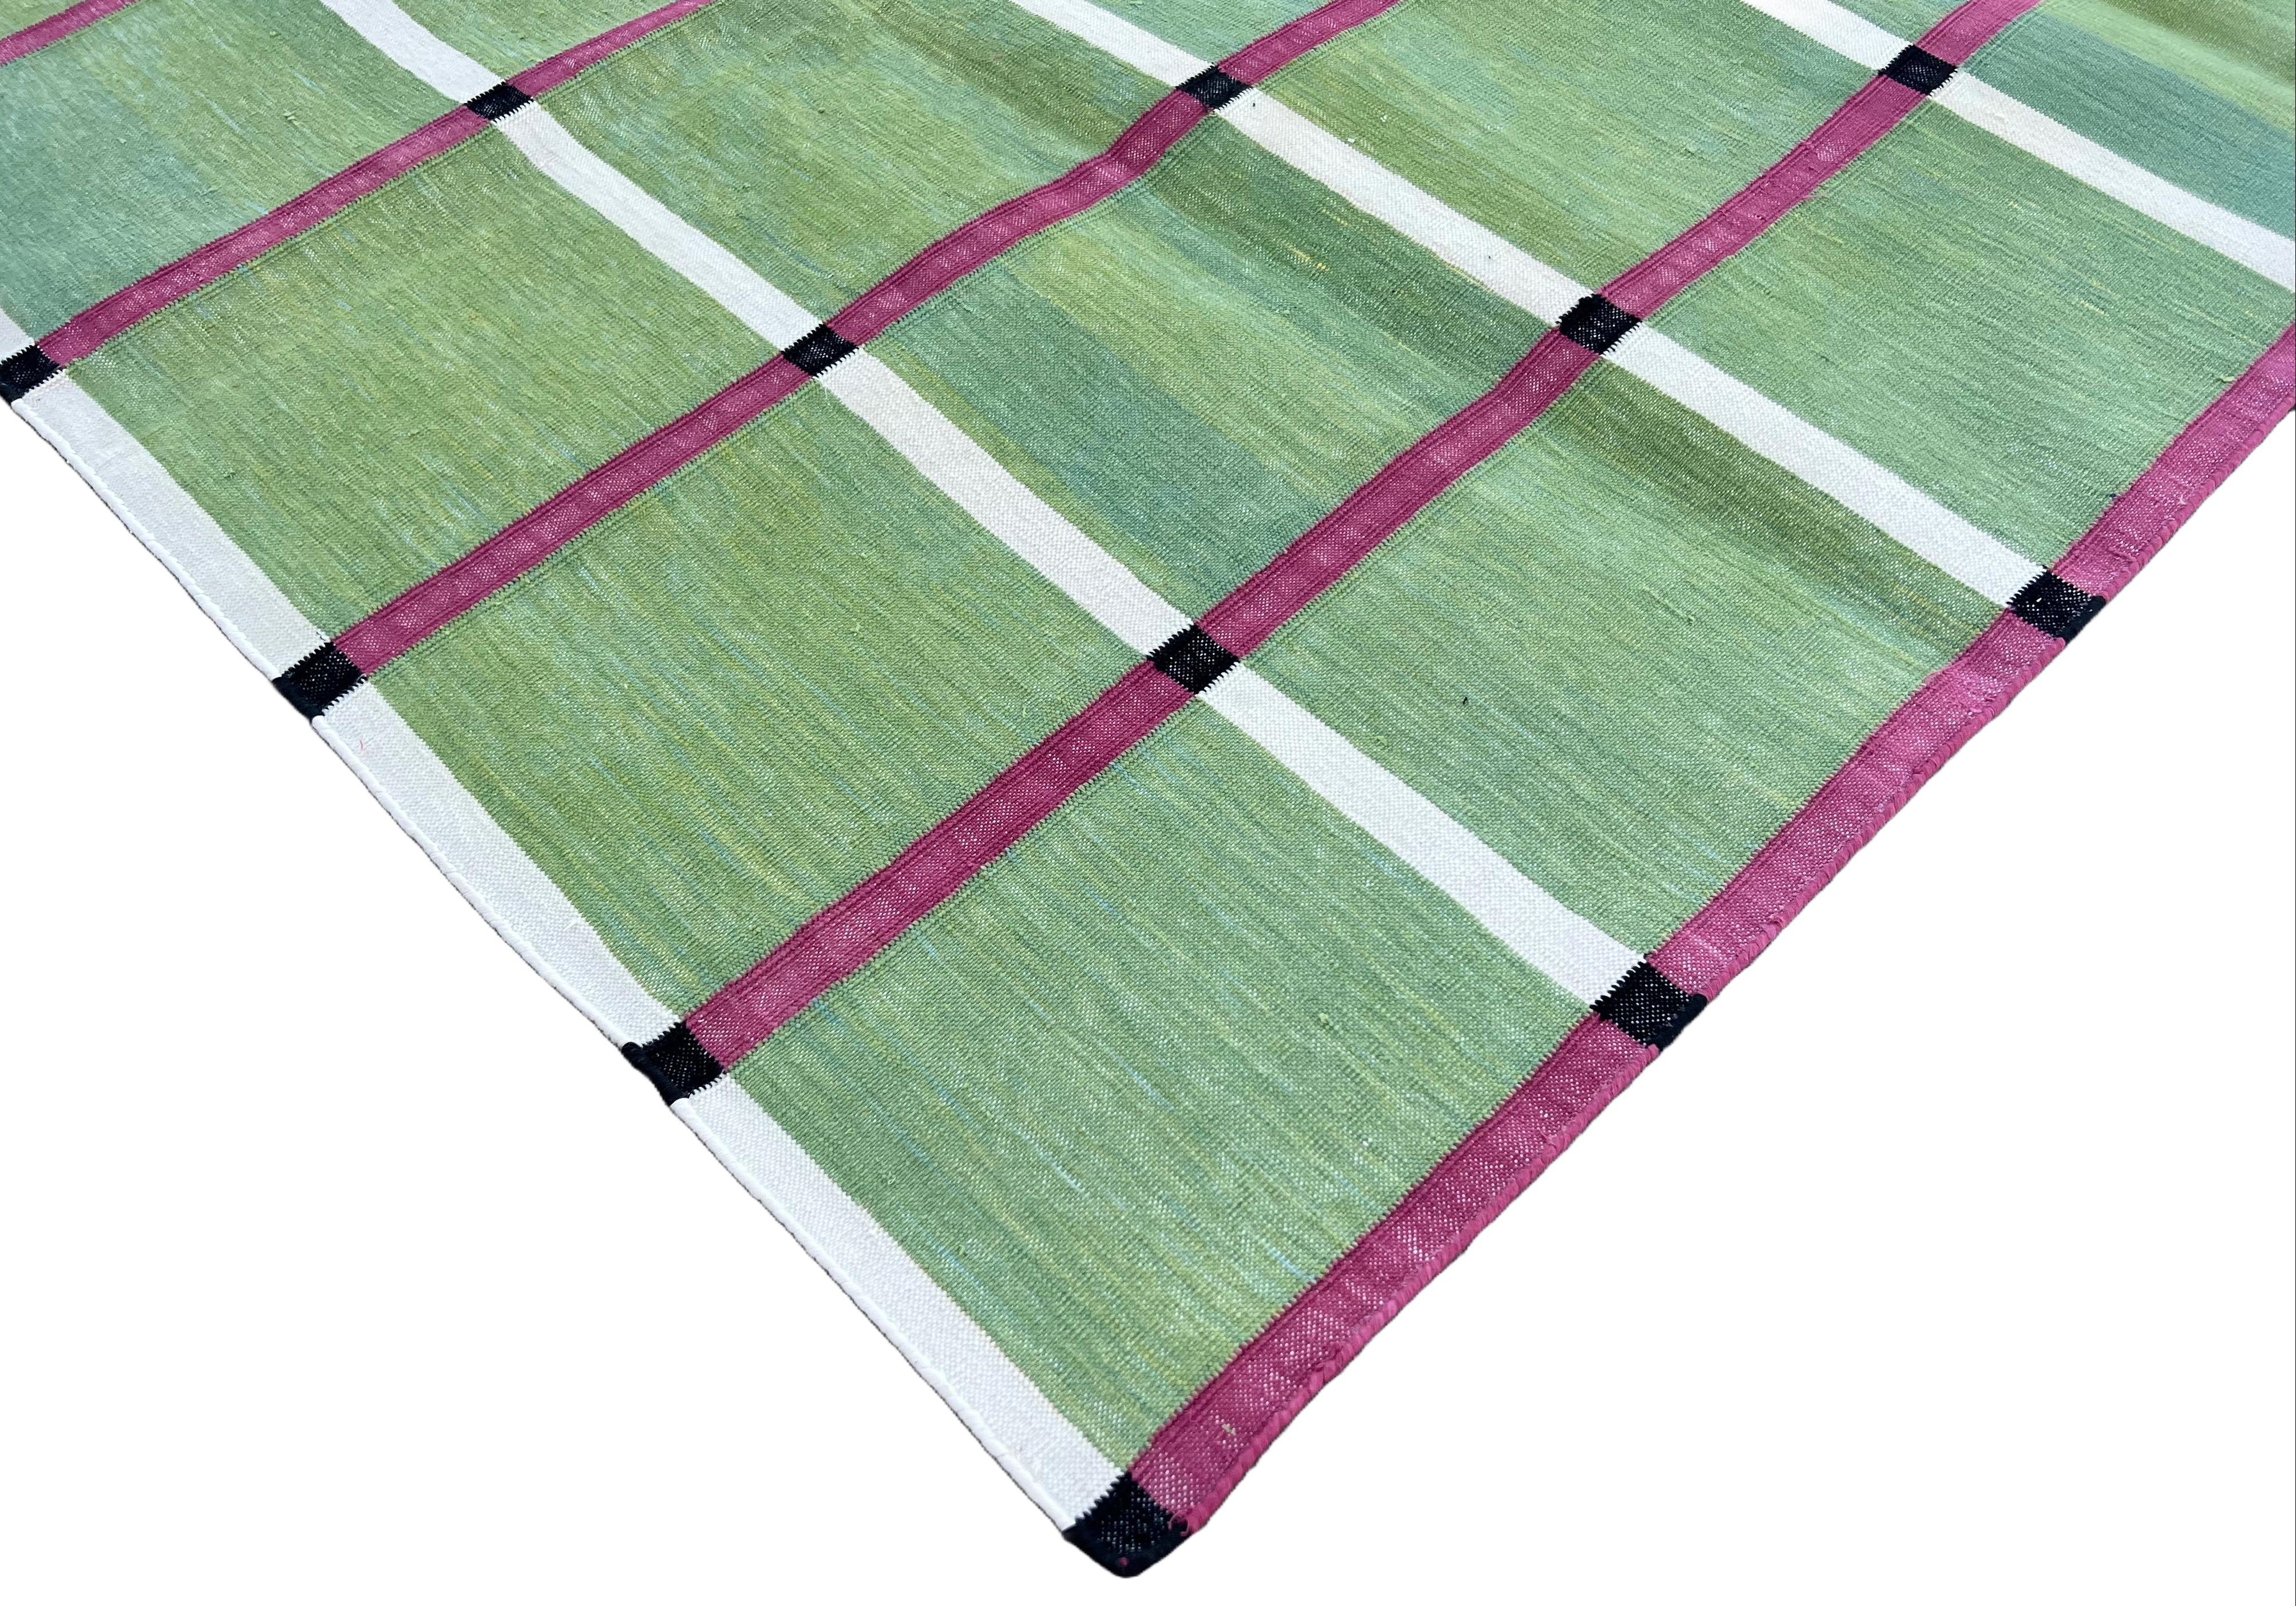 Mid-Century Modern Handmade Cotton Area Flat Weave Rug, Green, Pink Windowpane Check Indian Dhurrie For Sale